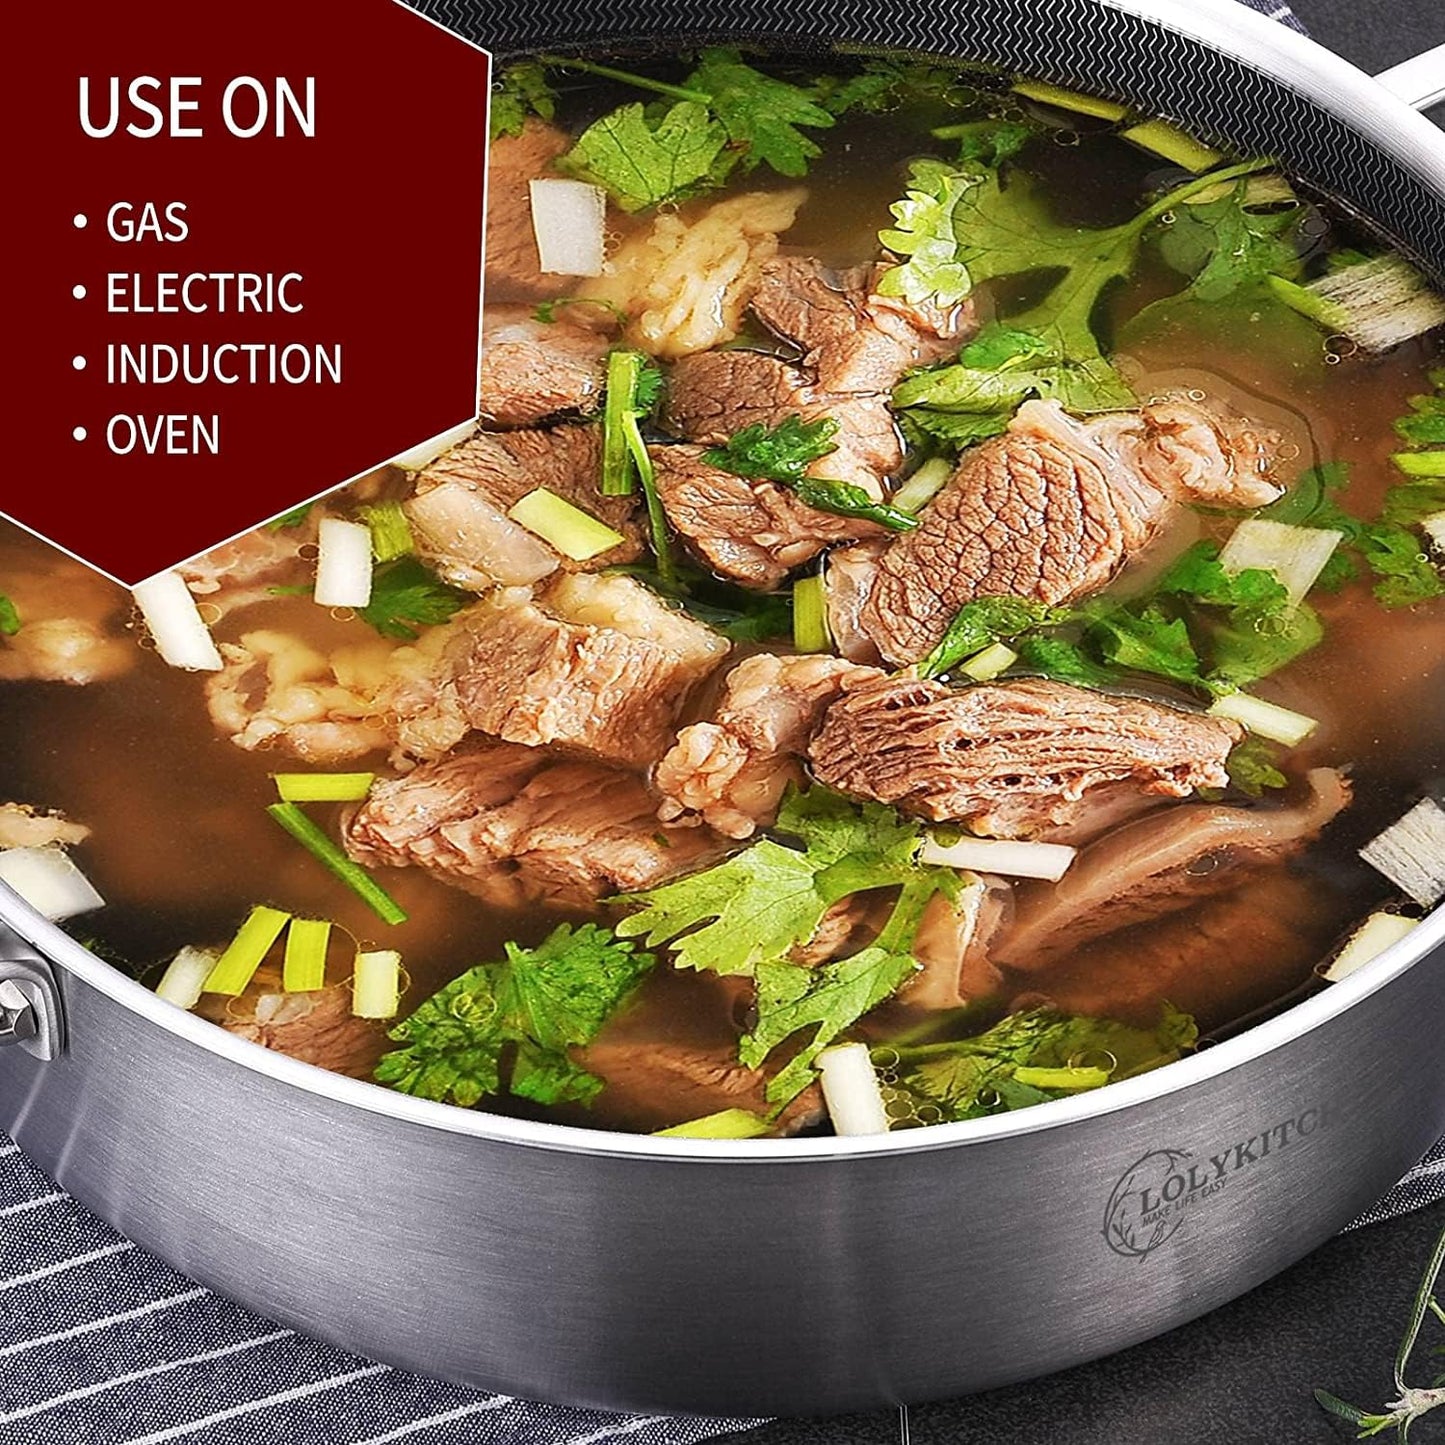 LOLYKITCH 6 Quarts Hybrid Tri-Ply Stainless Steel Non-stick Deep Frying Pan,Sauté Pan with lid,Induction Large Pan, Jumbo Cooker,Heavy Duty & Oven Safe.